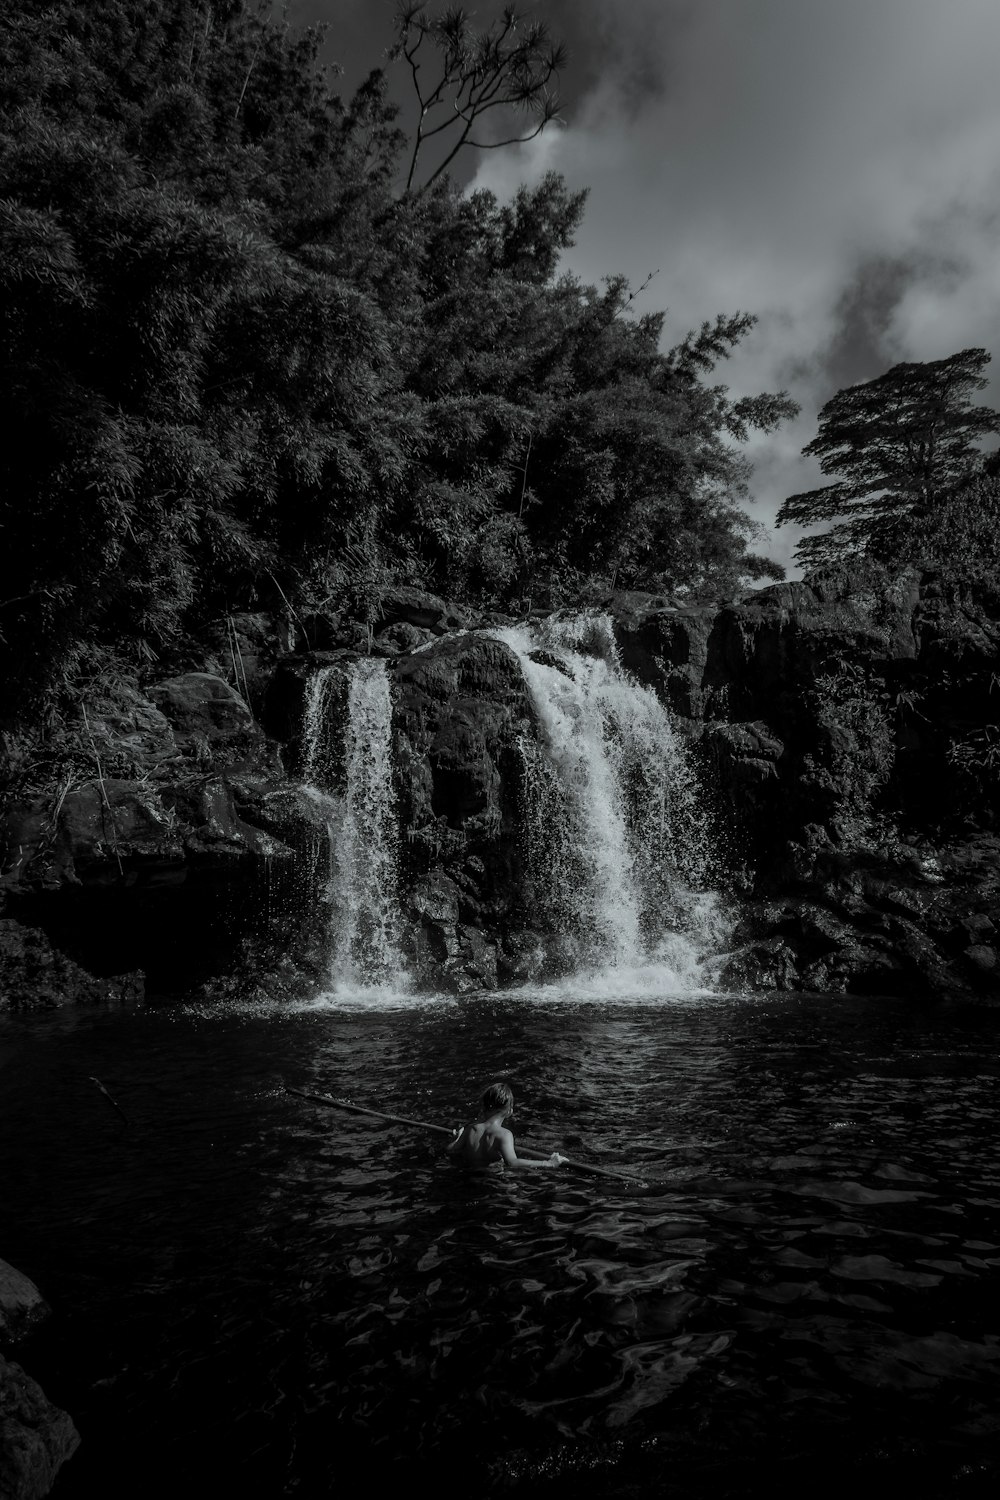 grayscale photo of woman in water falls